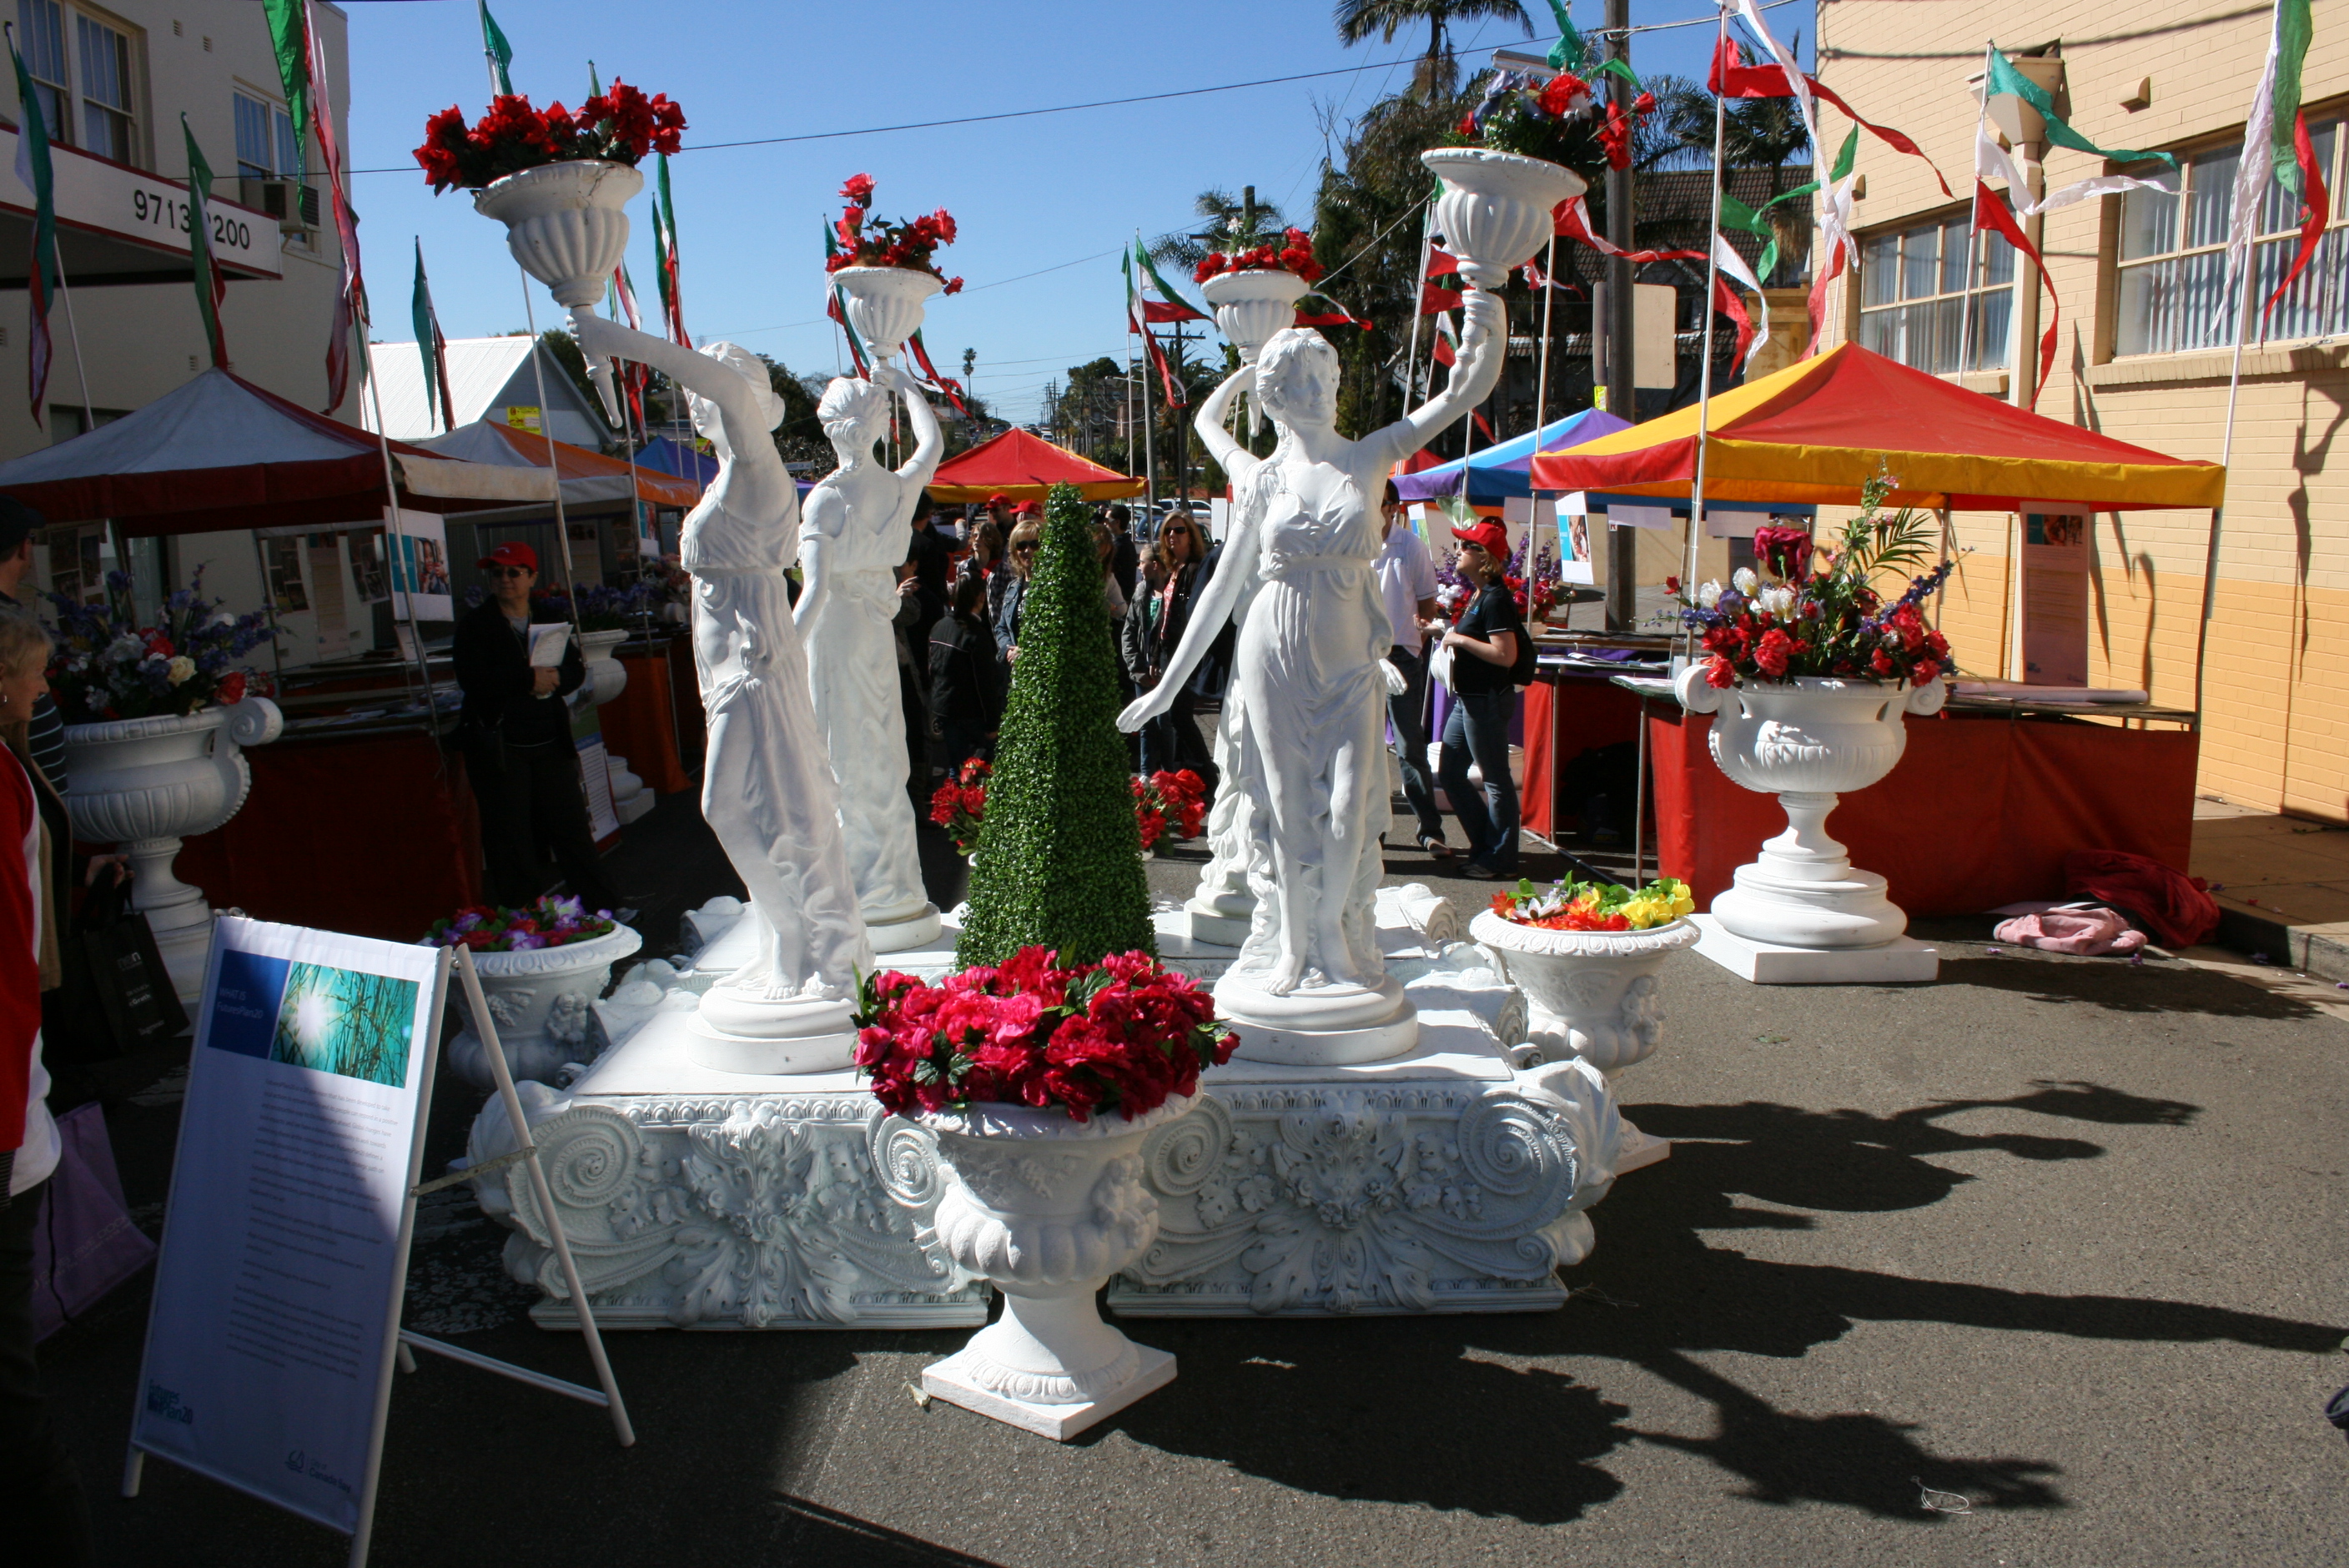 Statue display and stalls